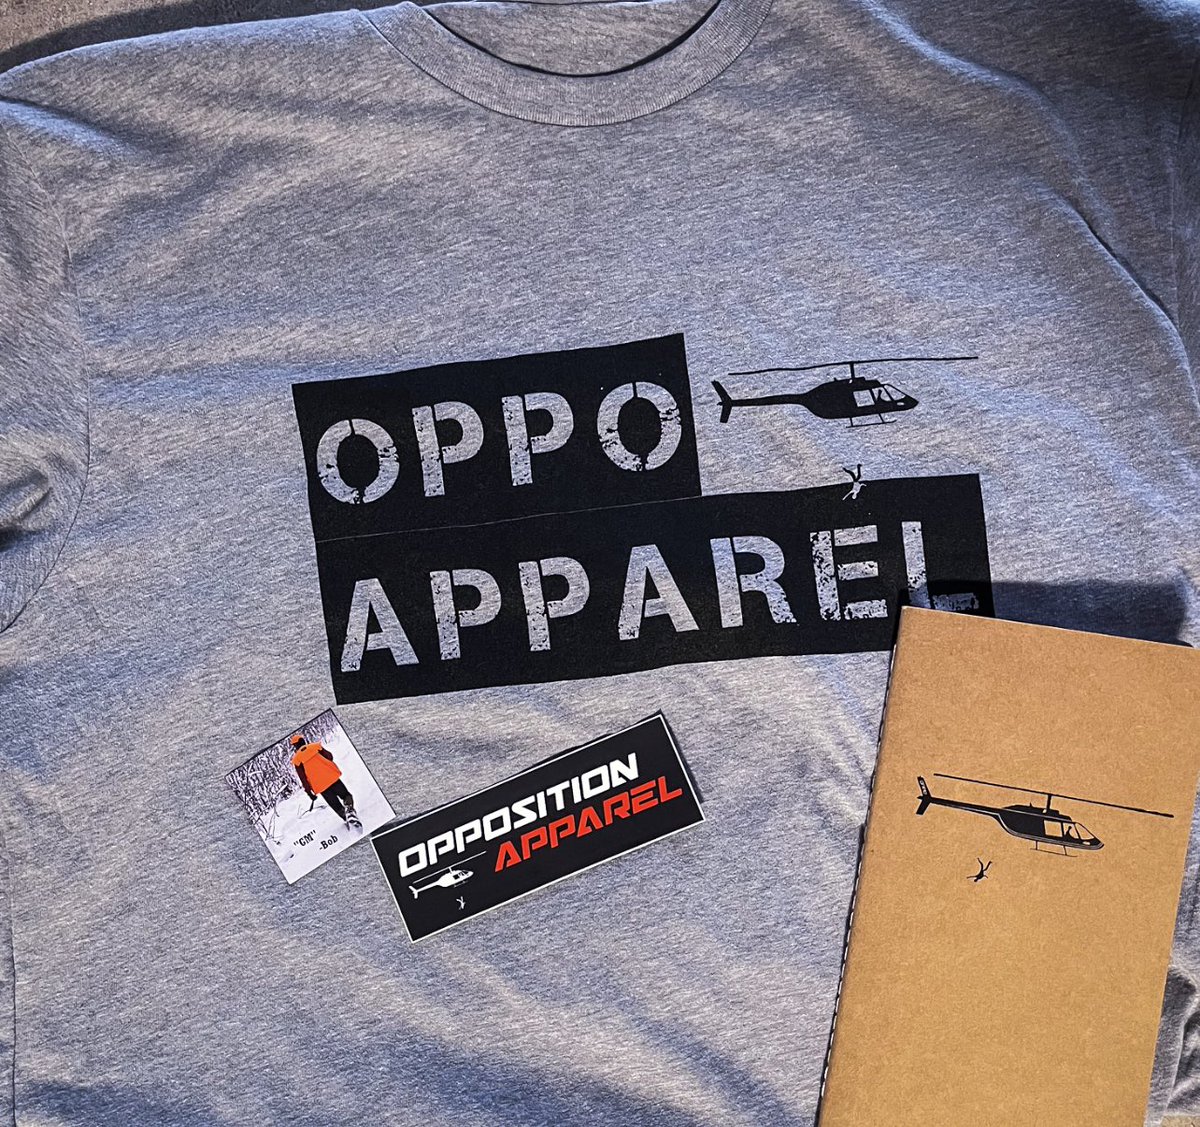 New stuff from @OppoApparel today!